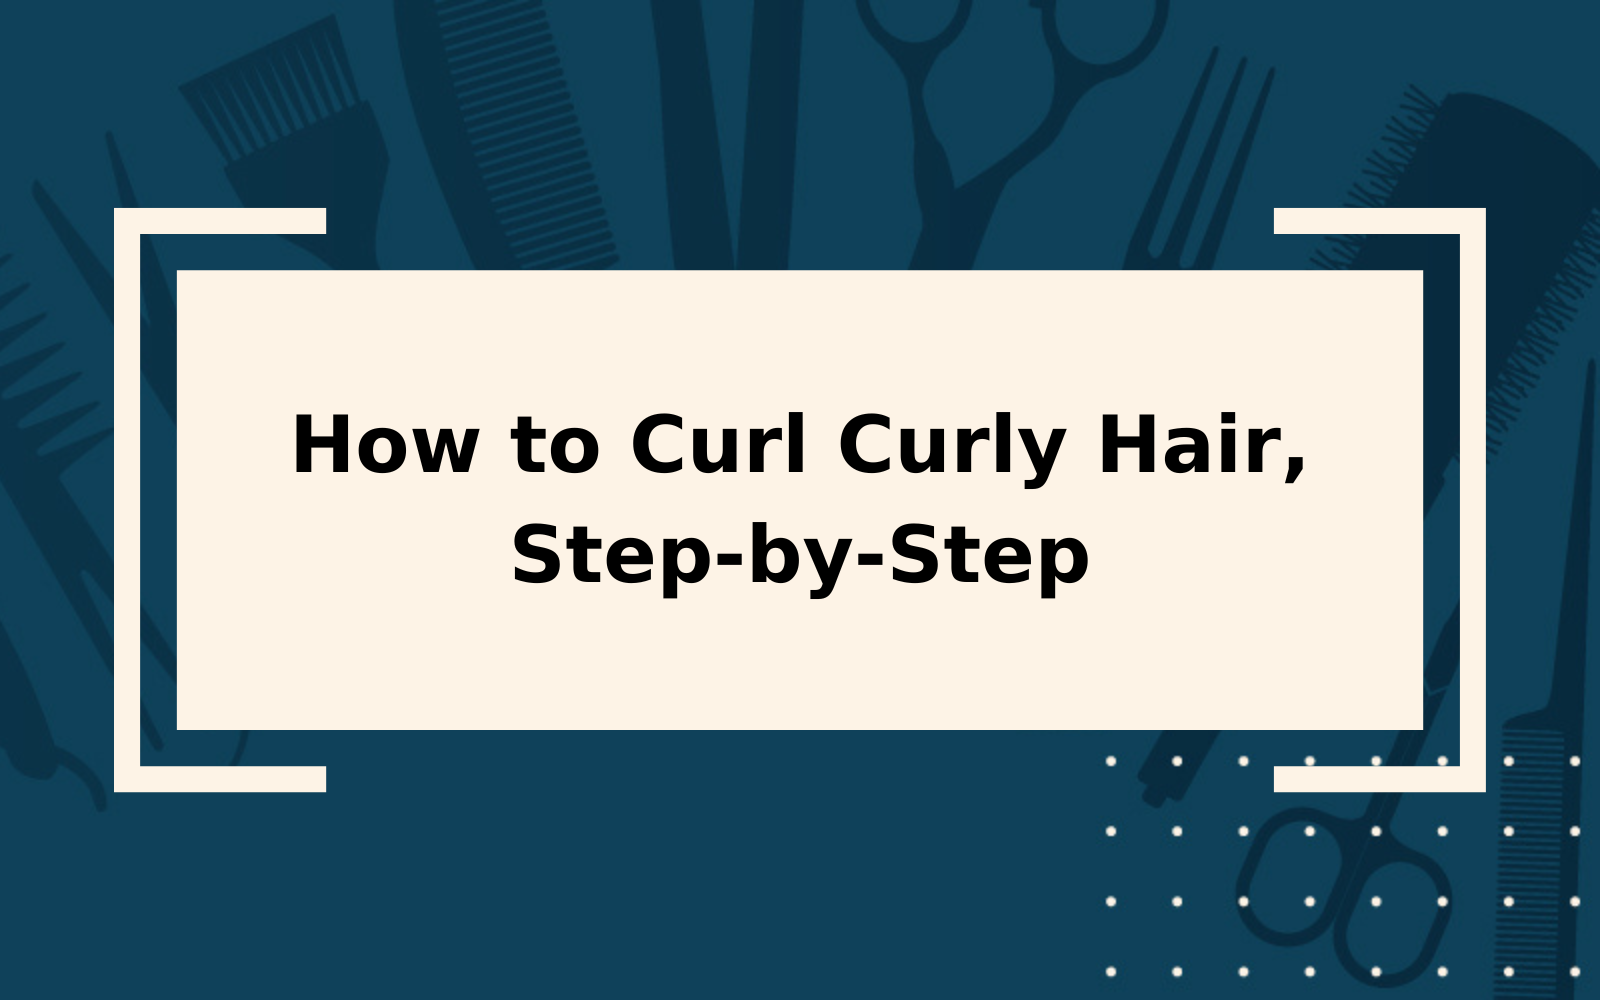 How to Curl Curly Hair | Step-by-Step Guide